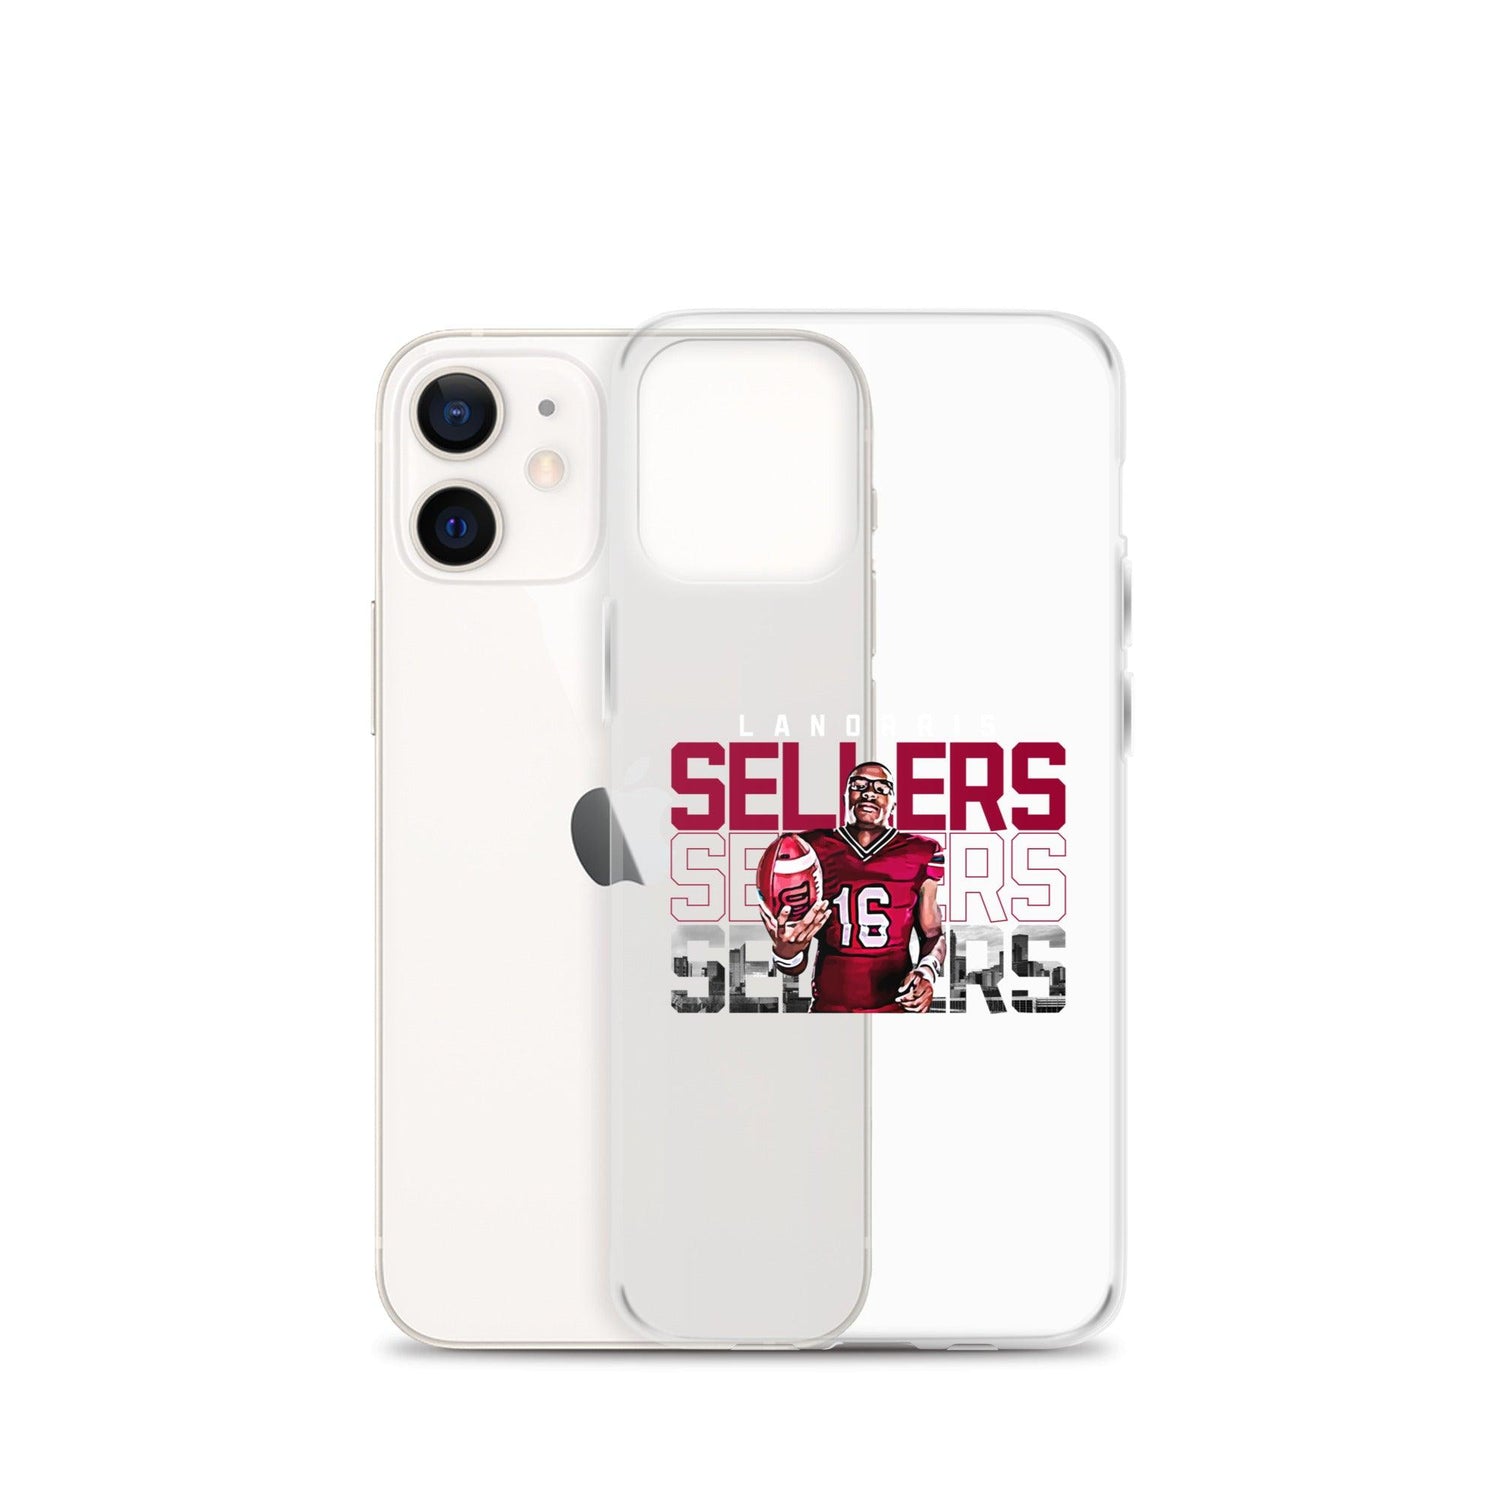 Lanorris Sellers "Gameday" iPhone Case - Fan Arch